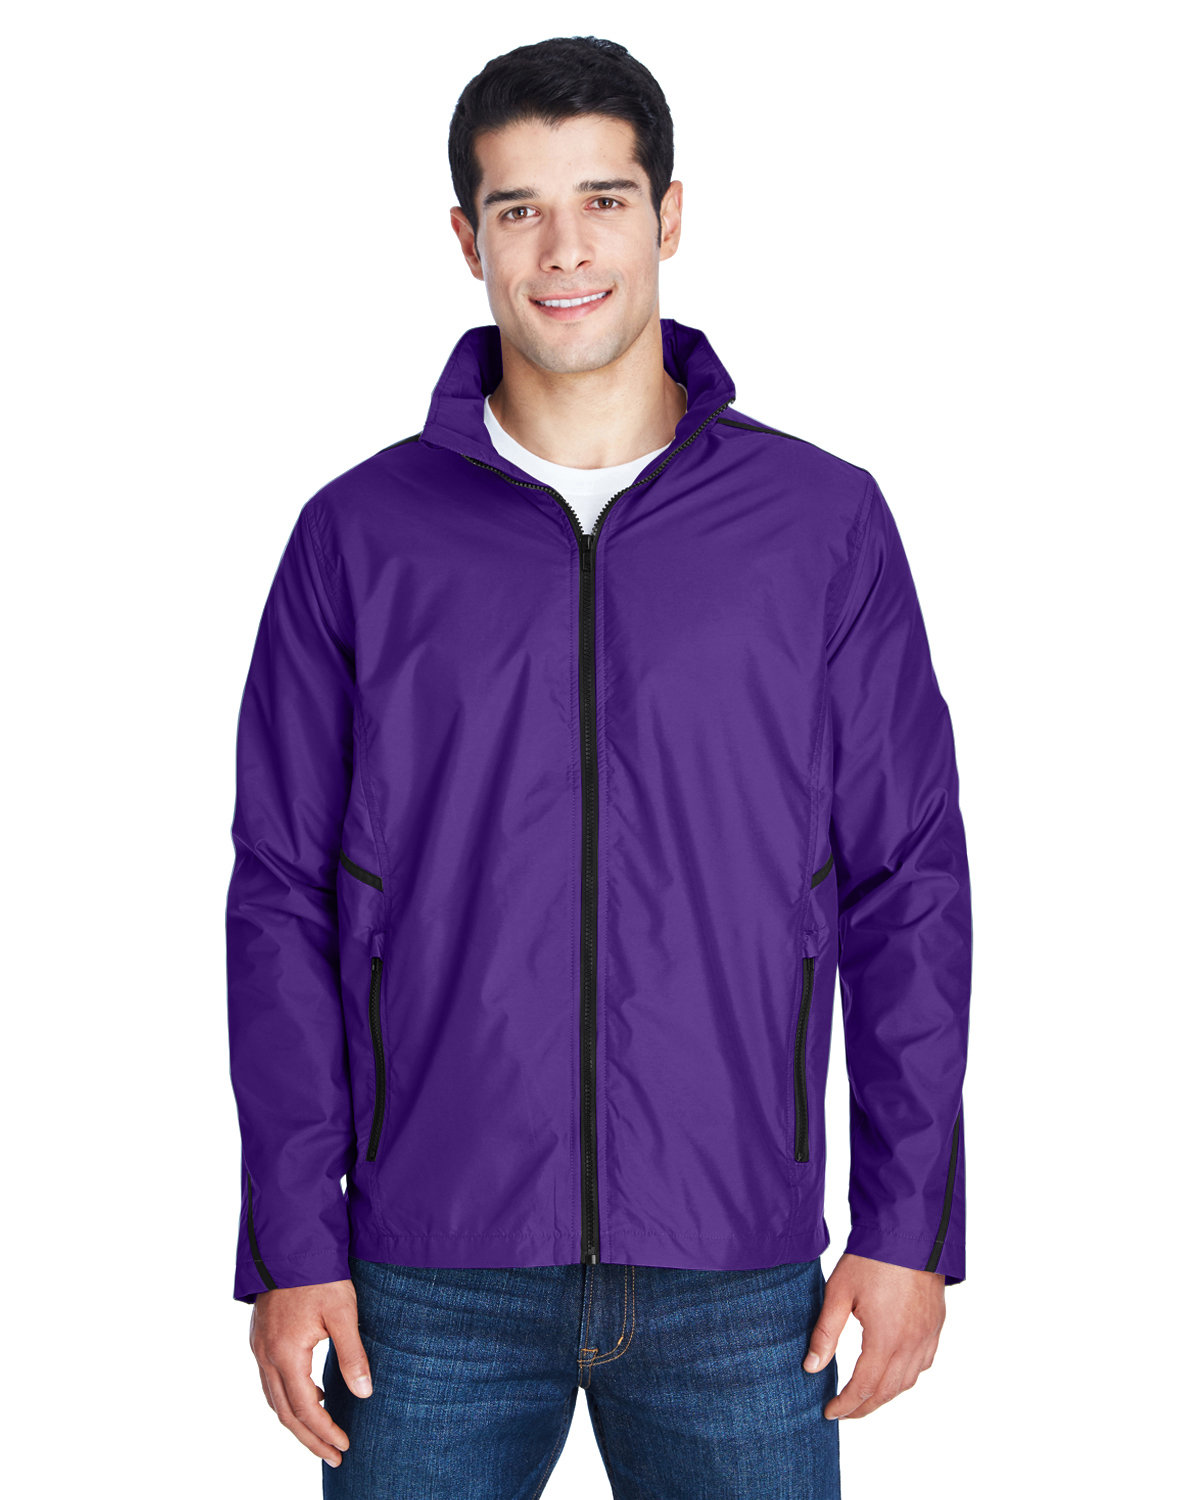 Team 365 Adult Conquest Jacket with Mesh Lining SPORT PURPLE 